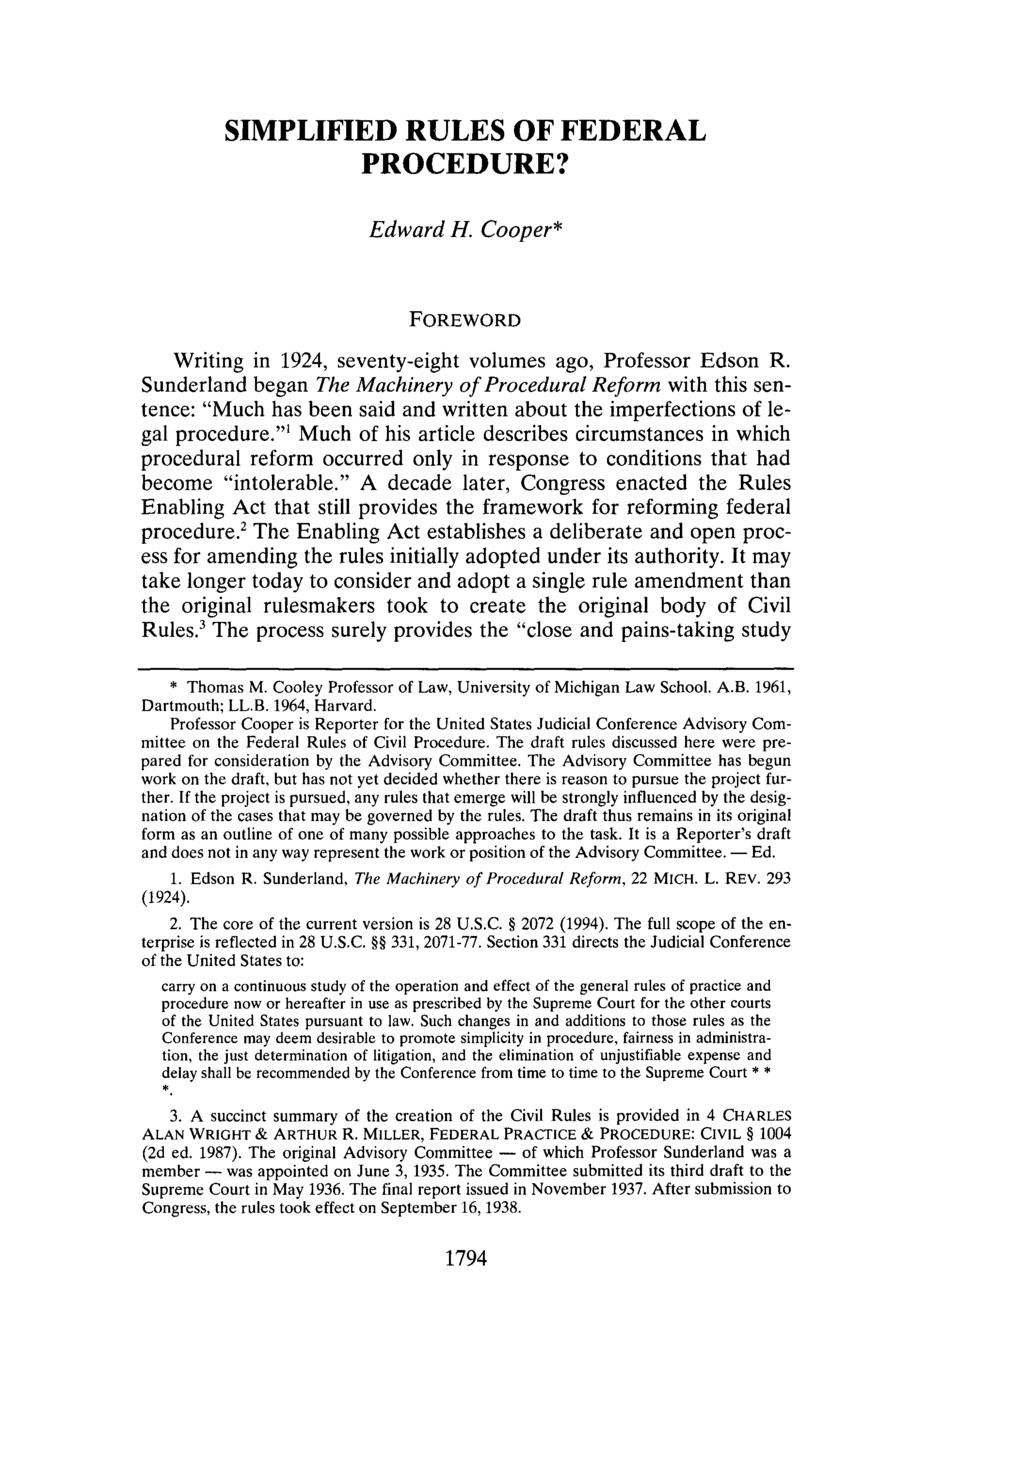 SIMPLIFIED RULES OF FEDERAL PROCEDURE? Edward H. Cooper* FOREWORD Writing in 1924, seventy-eight volumes ago, Professor Edson R.